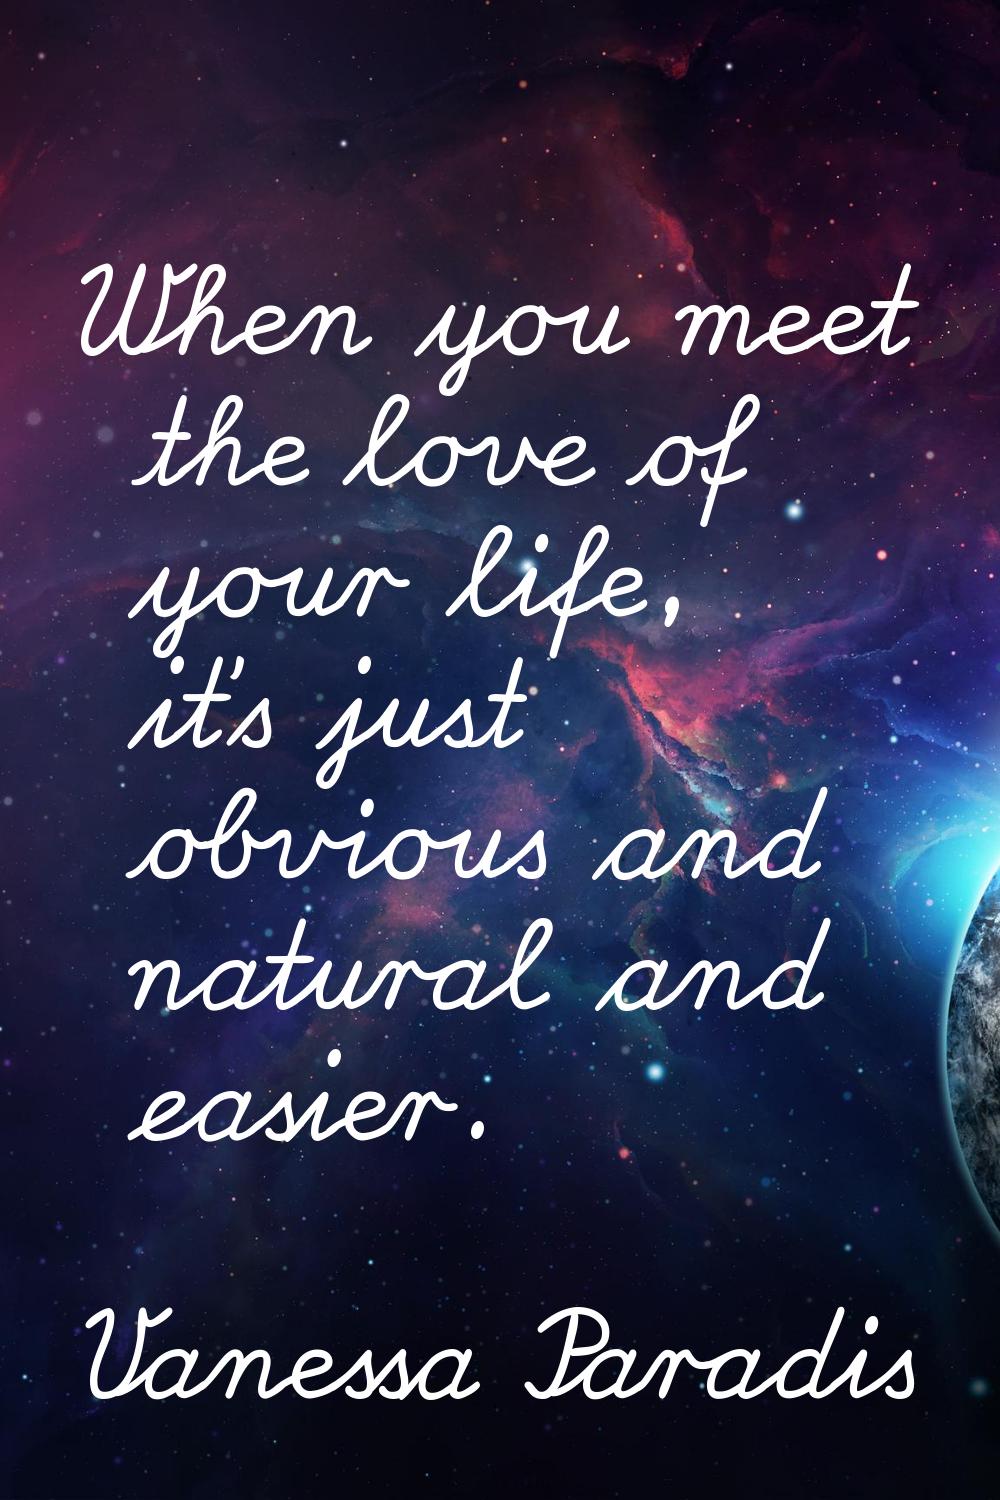 When you meet the love of your life, it's just obvious and natural and easier.